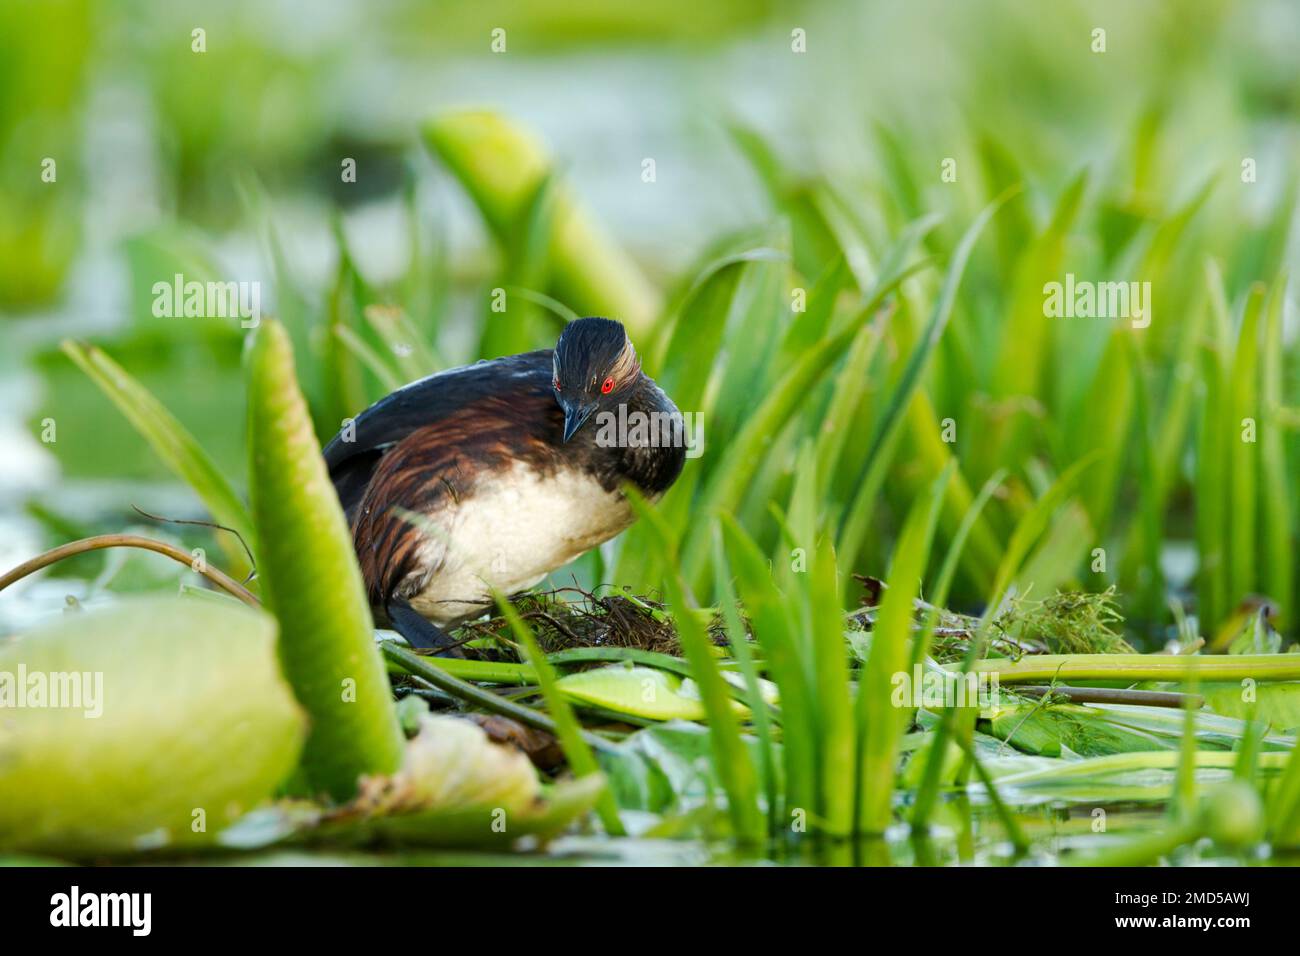 Black-necked grebe also known as eared grebe (Podiceps nigricollis) sitting on its nest built on lilly leaves and other vegetation Stock Photo